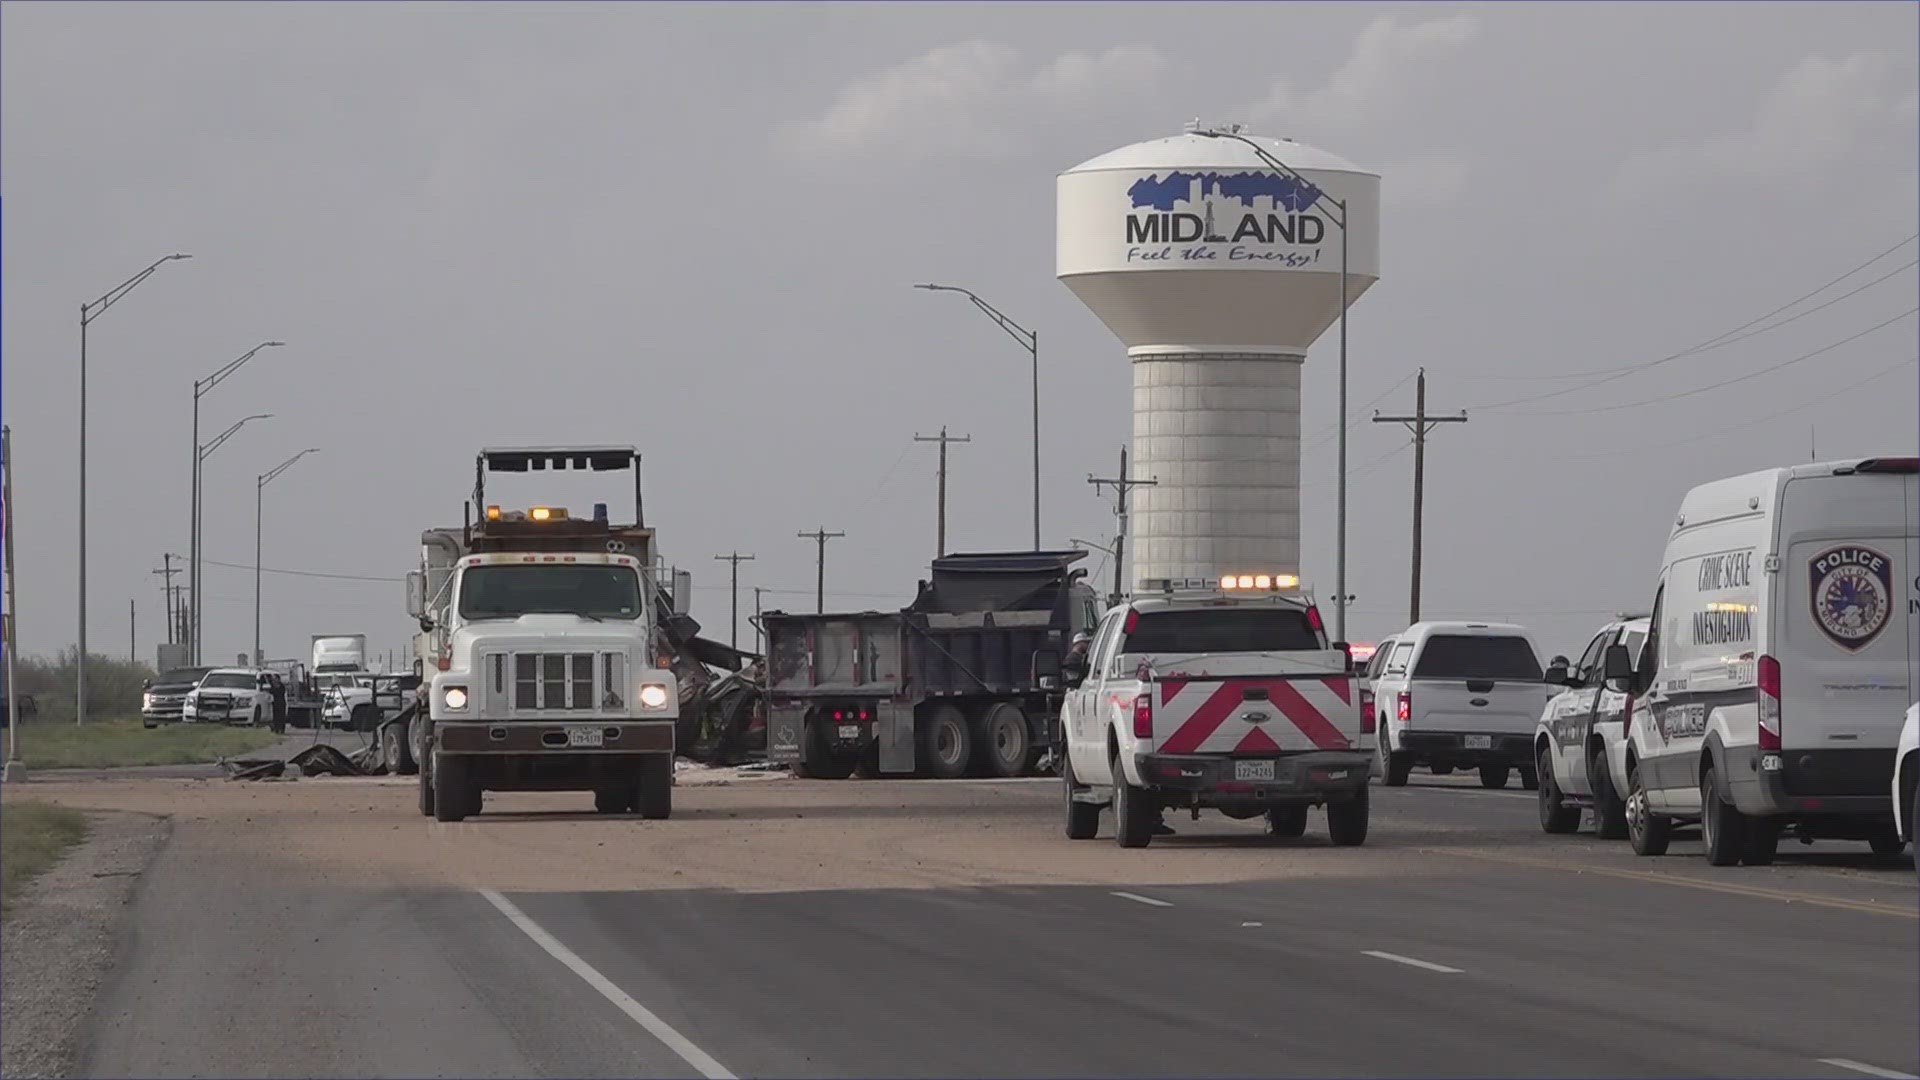 According to the Midland Police Department, a dump truck failed to yield the right of way to a Ford F-350 traveling southbound on SH 349, causing a fatal collision.